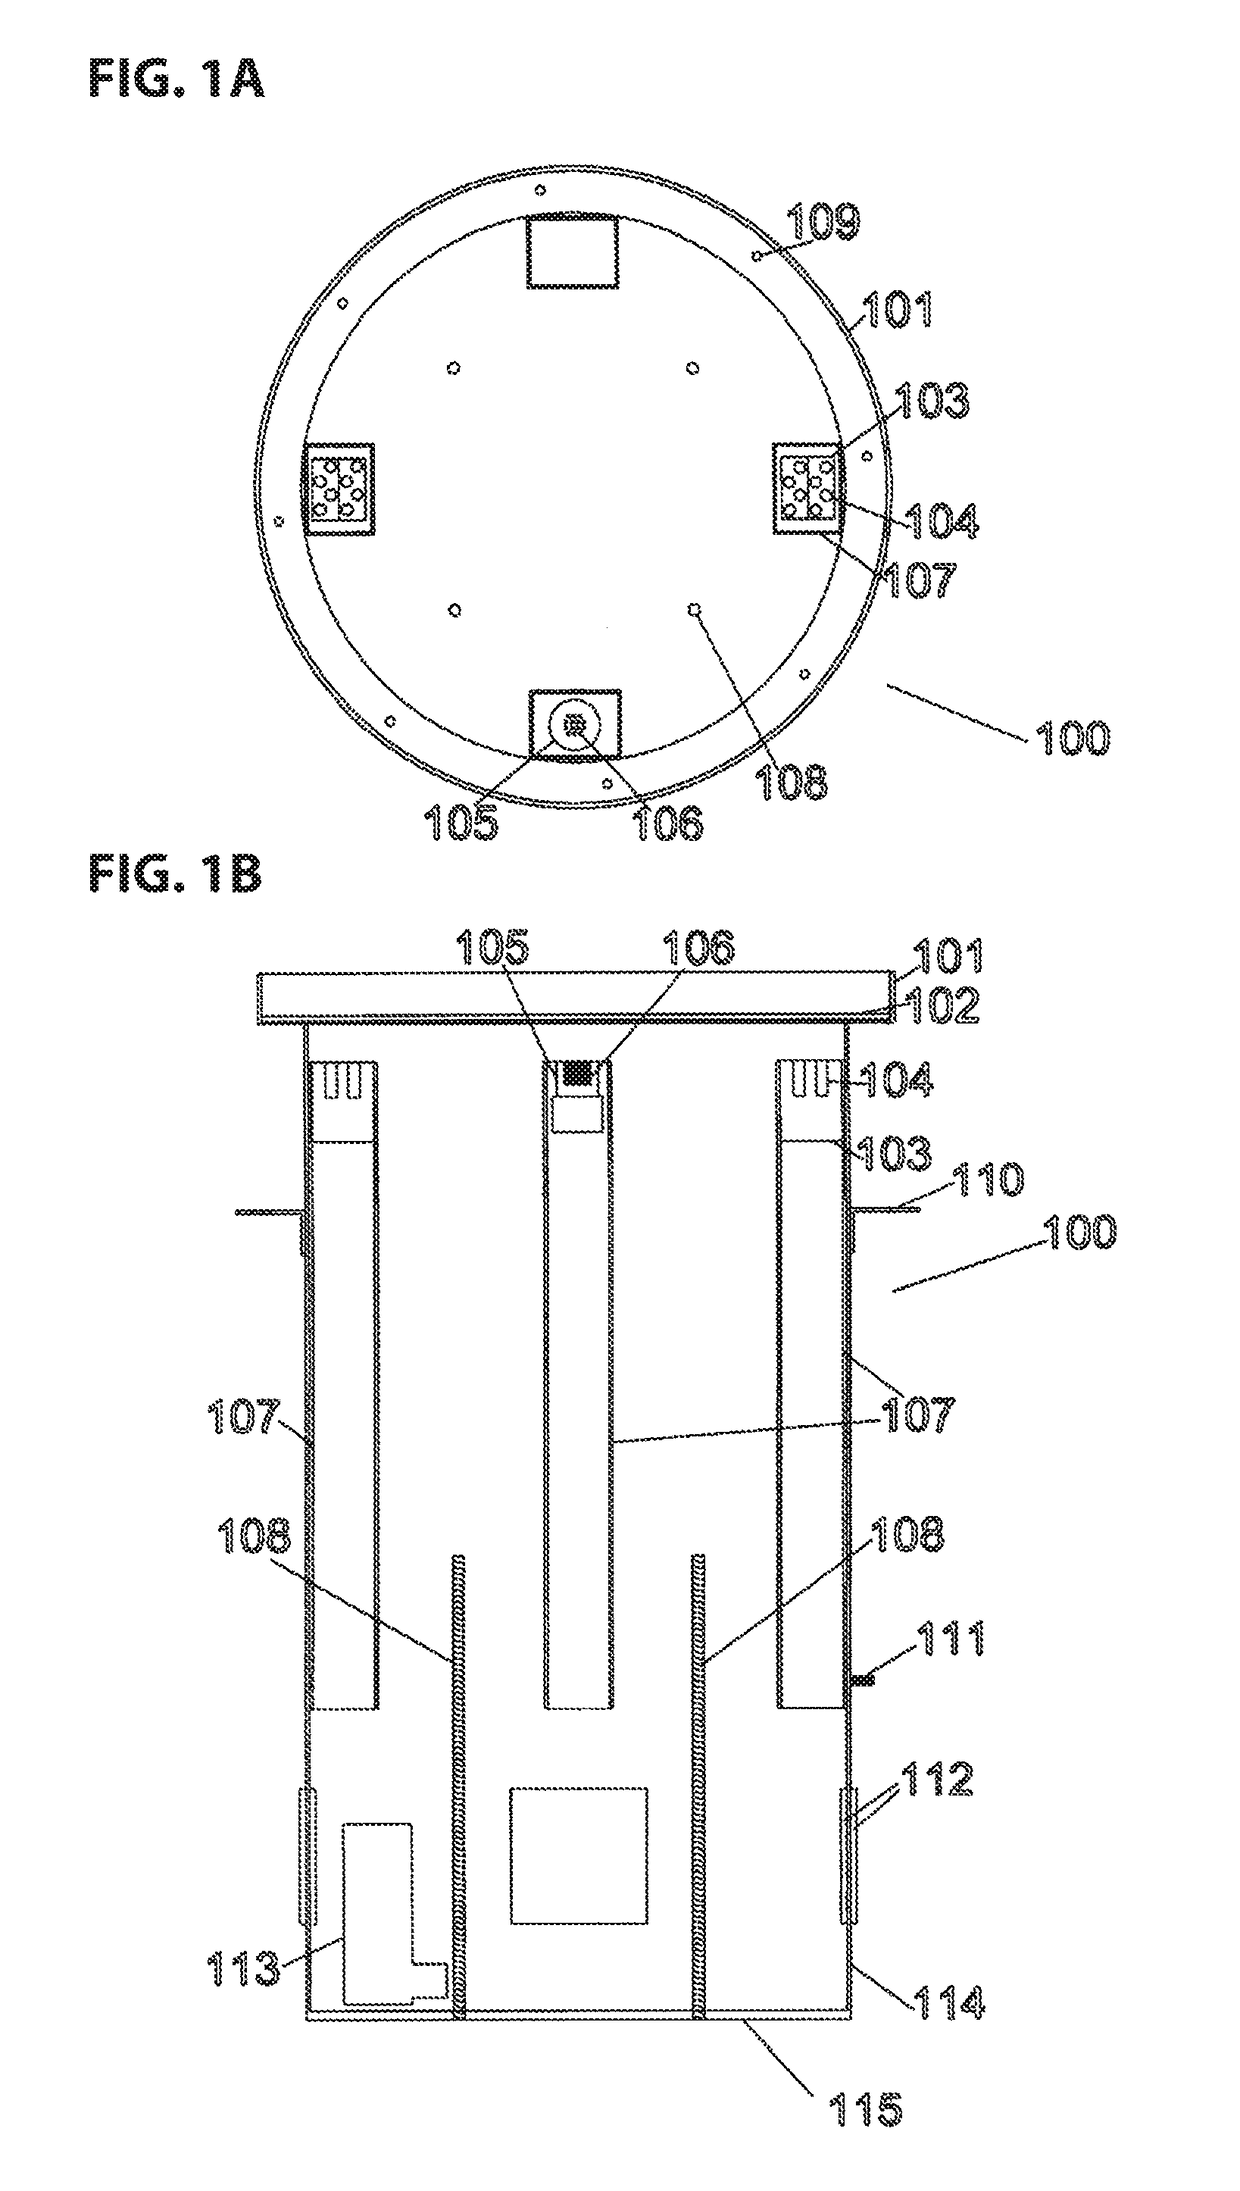 Pop up electrical apparatus with wireless charging component for electric vehicles